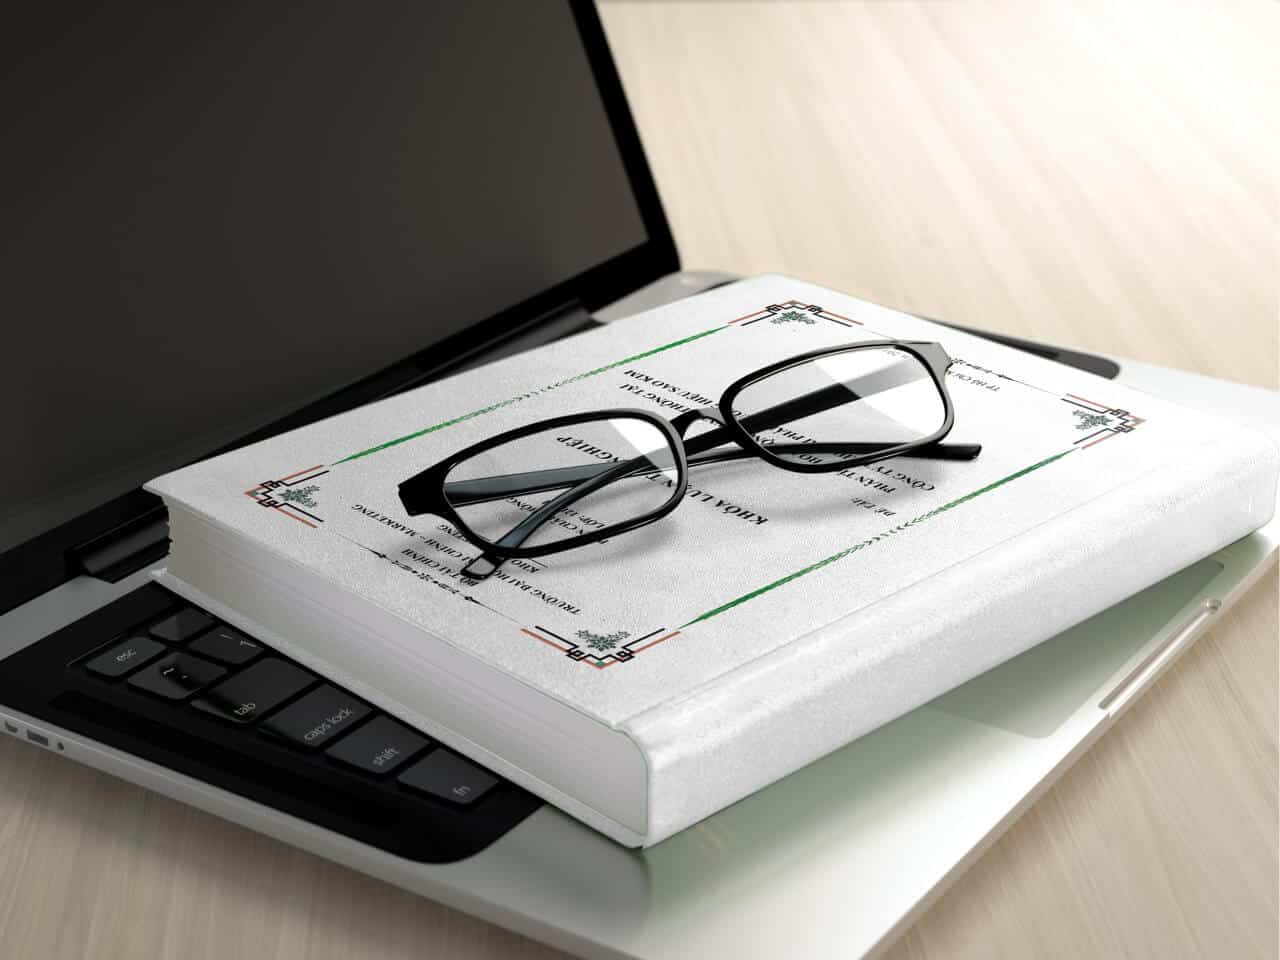 glasses, book and laptop on table